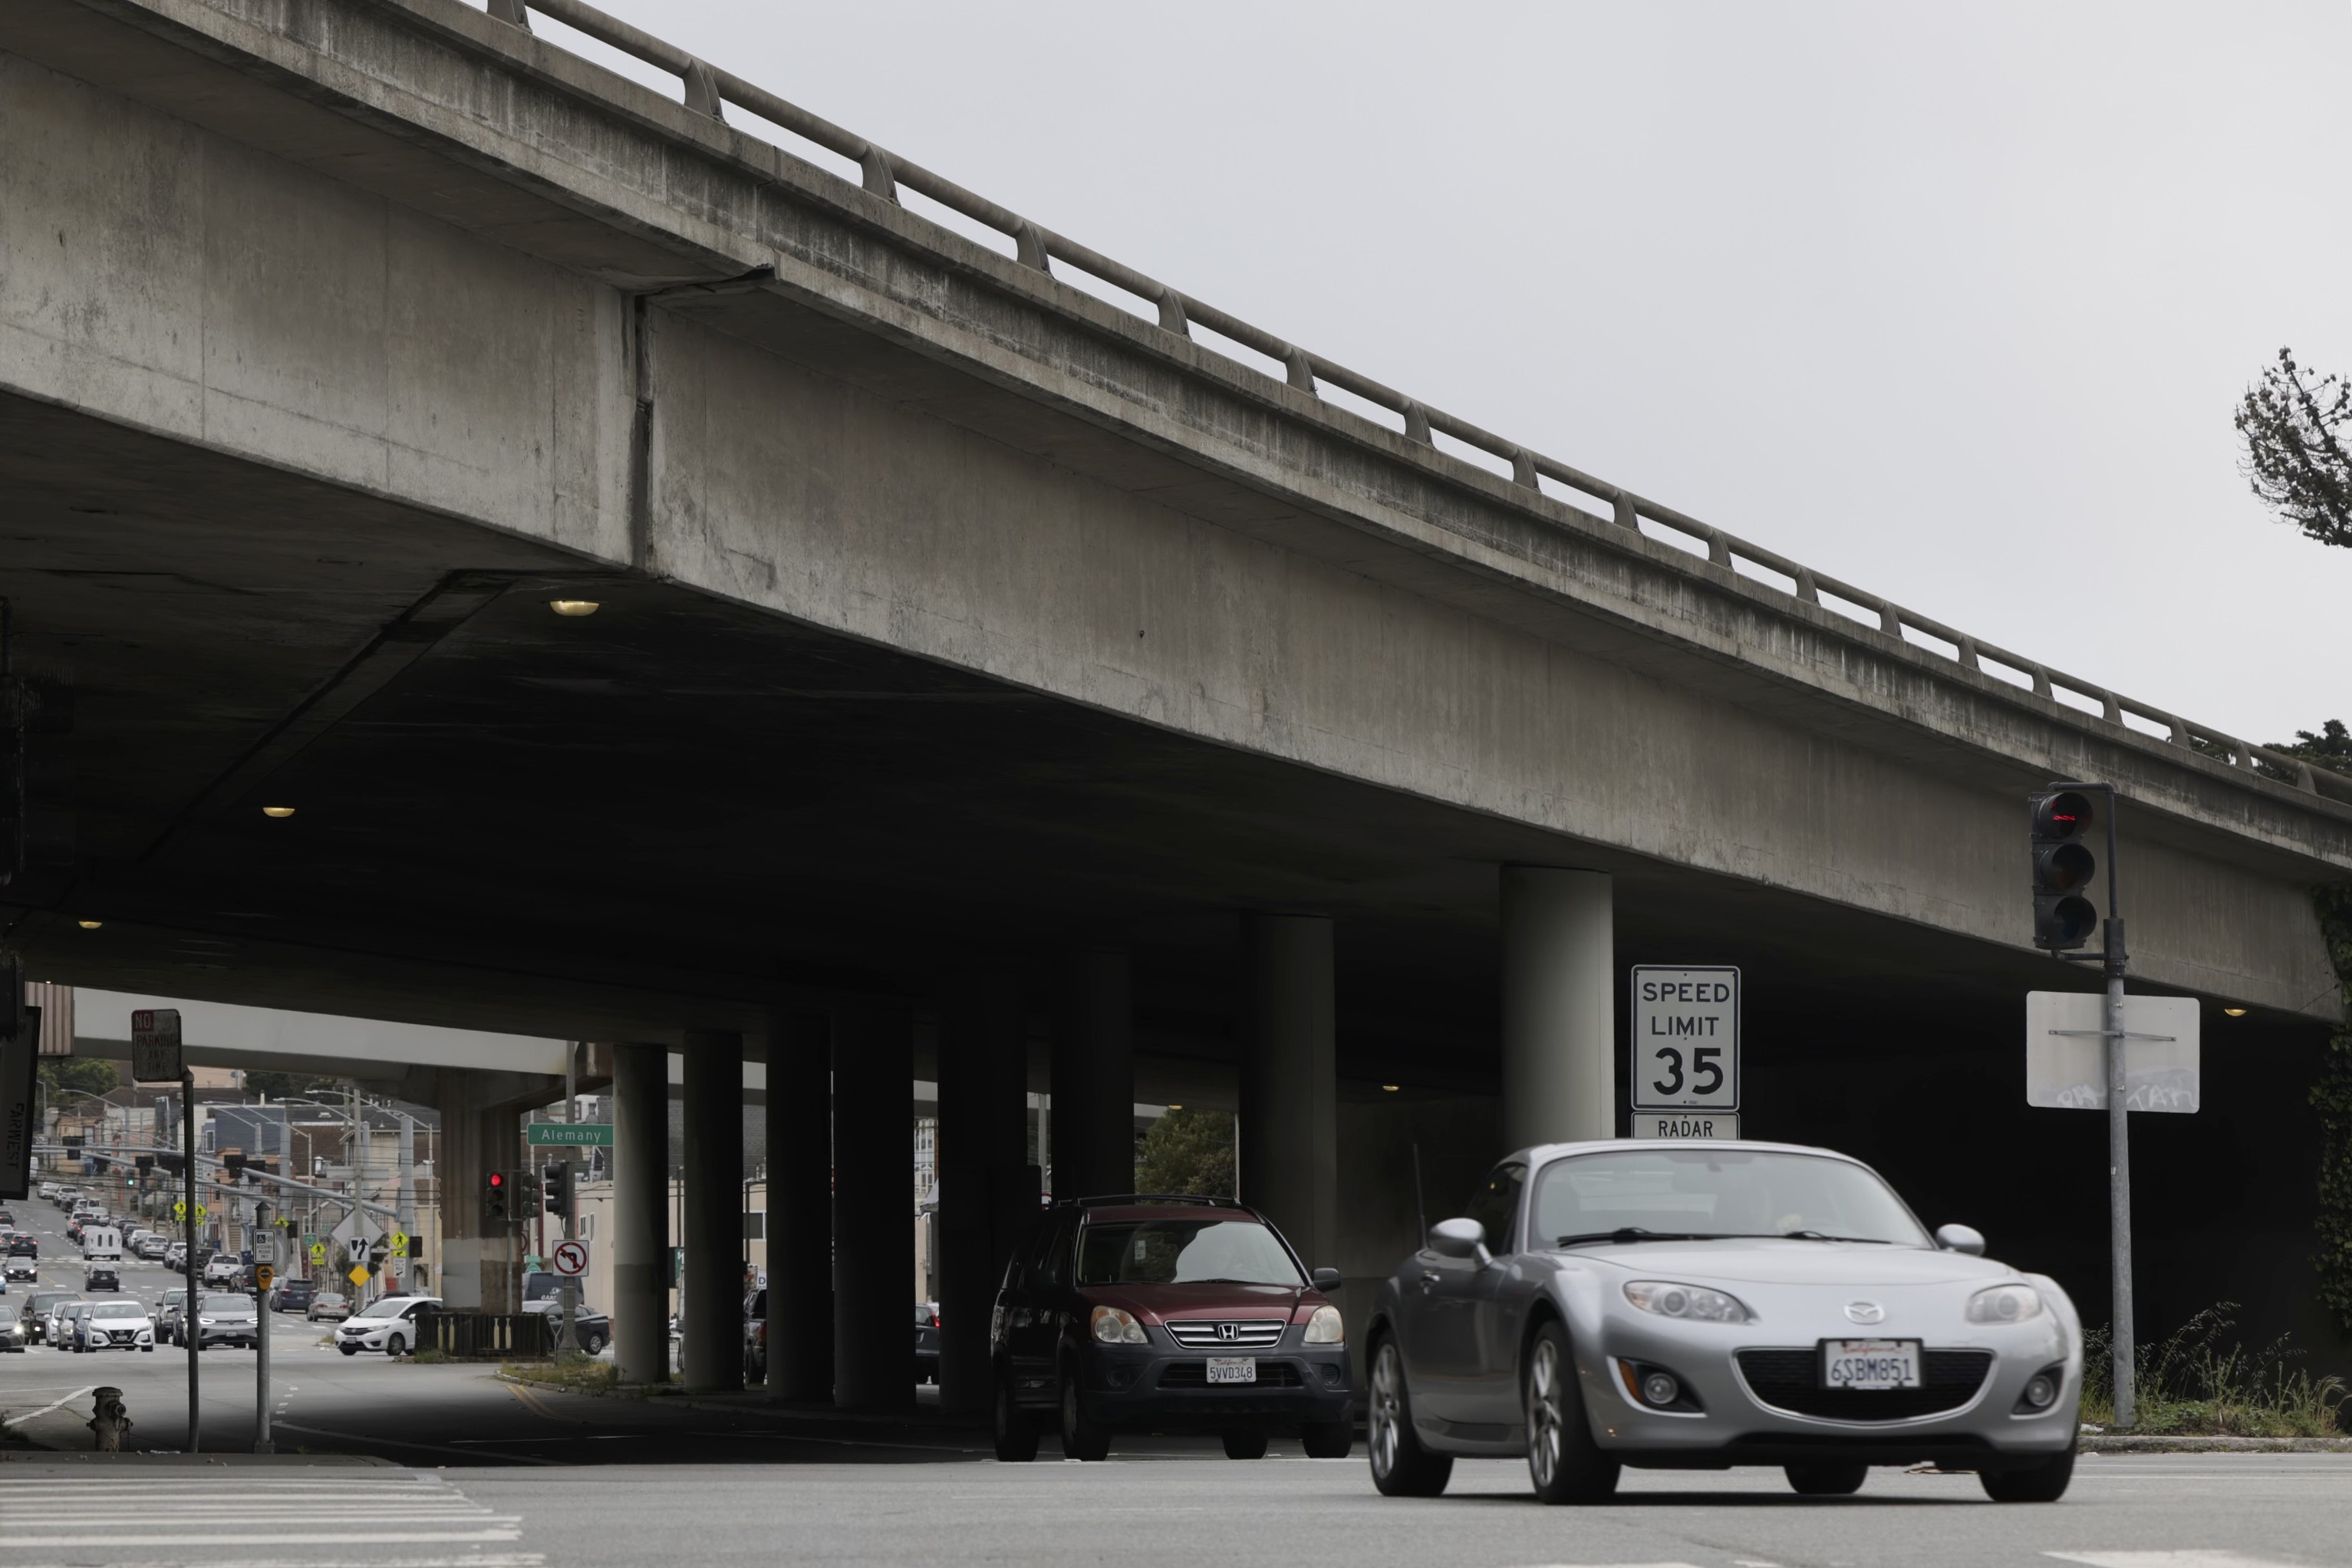 A car waits at a red light beneath an overpass, with a speed limit sign nearby and a busy intersection in the background.